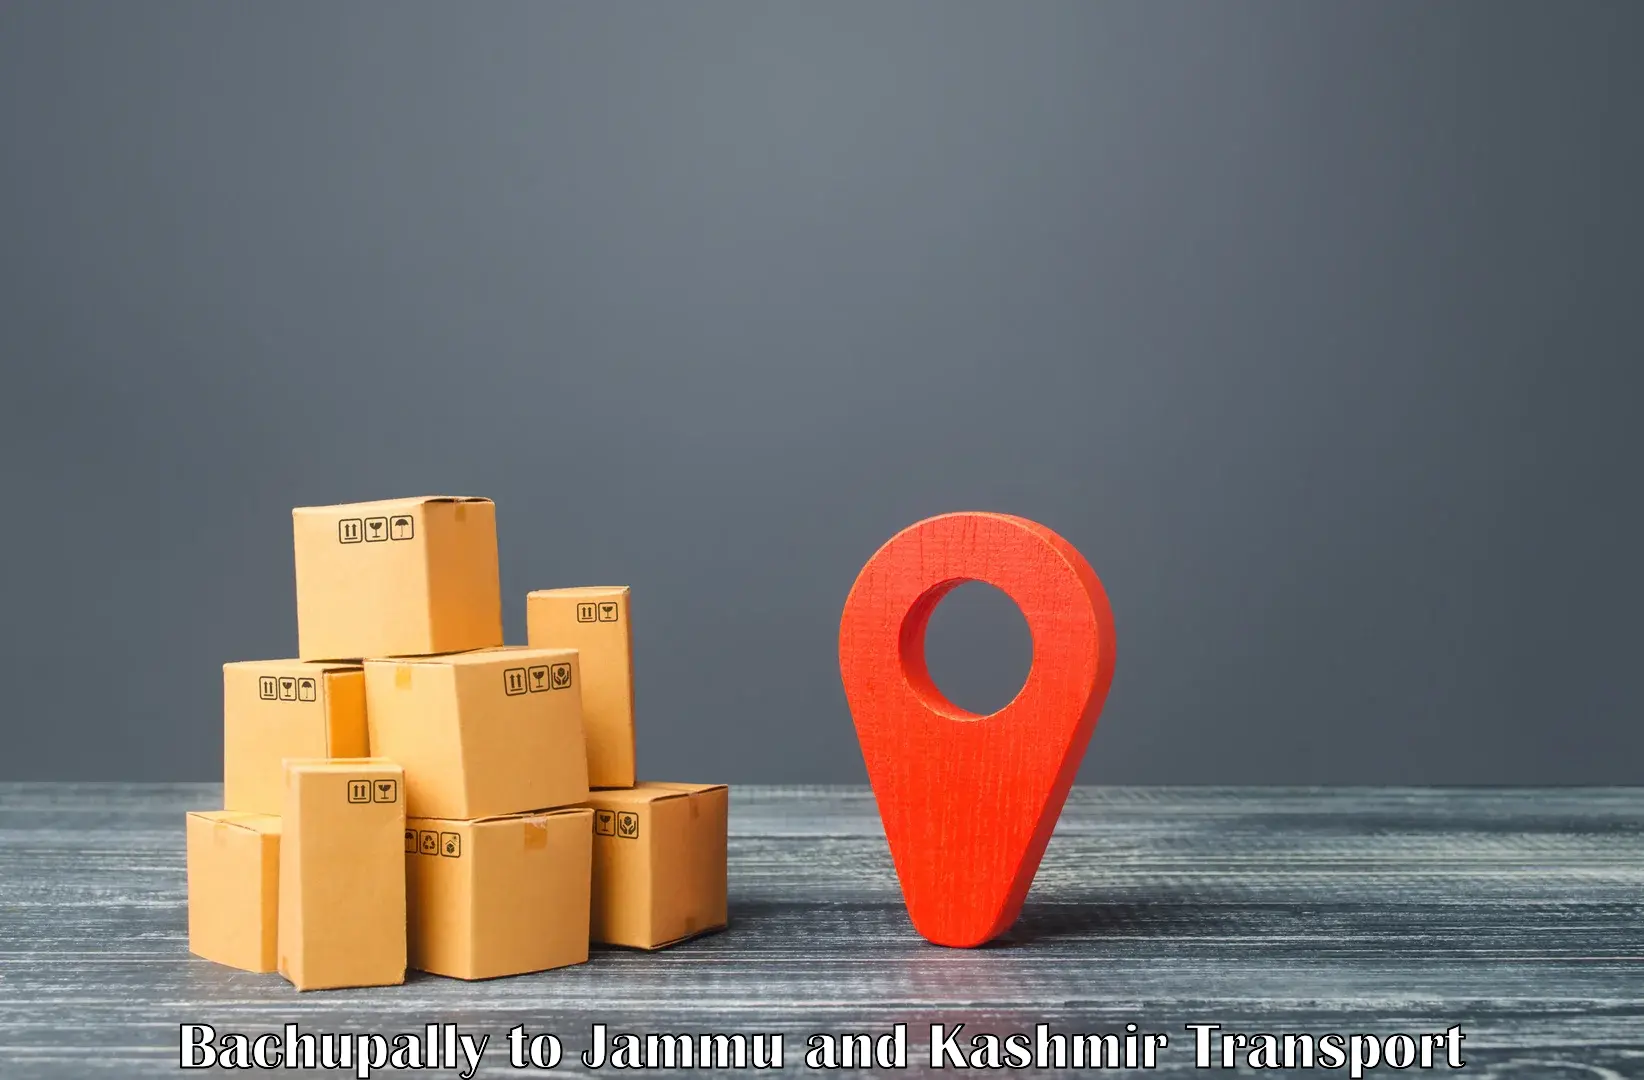 Truck transport companies in India Bachupally to Jammu and Kashmir